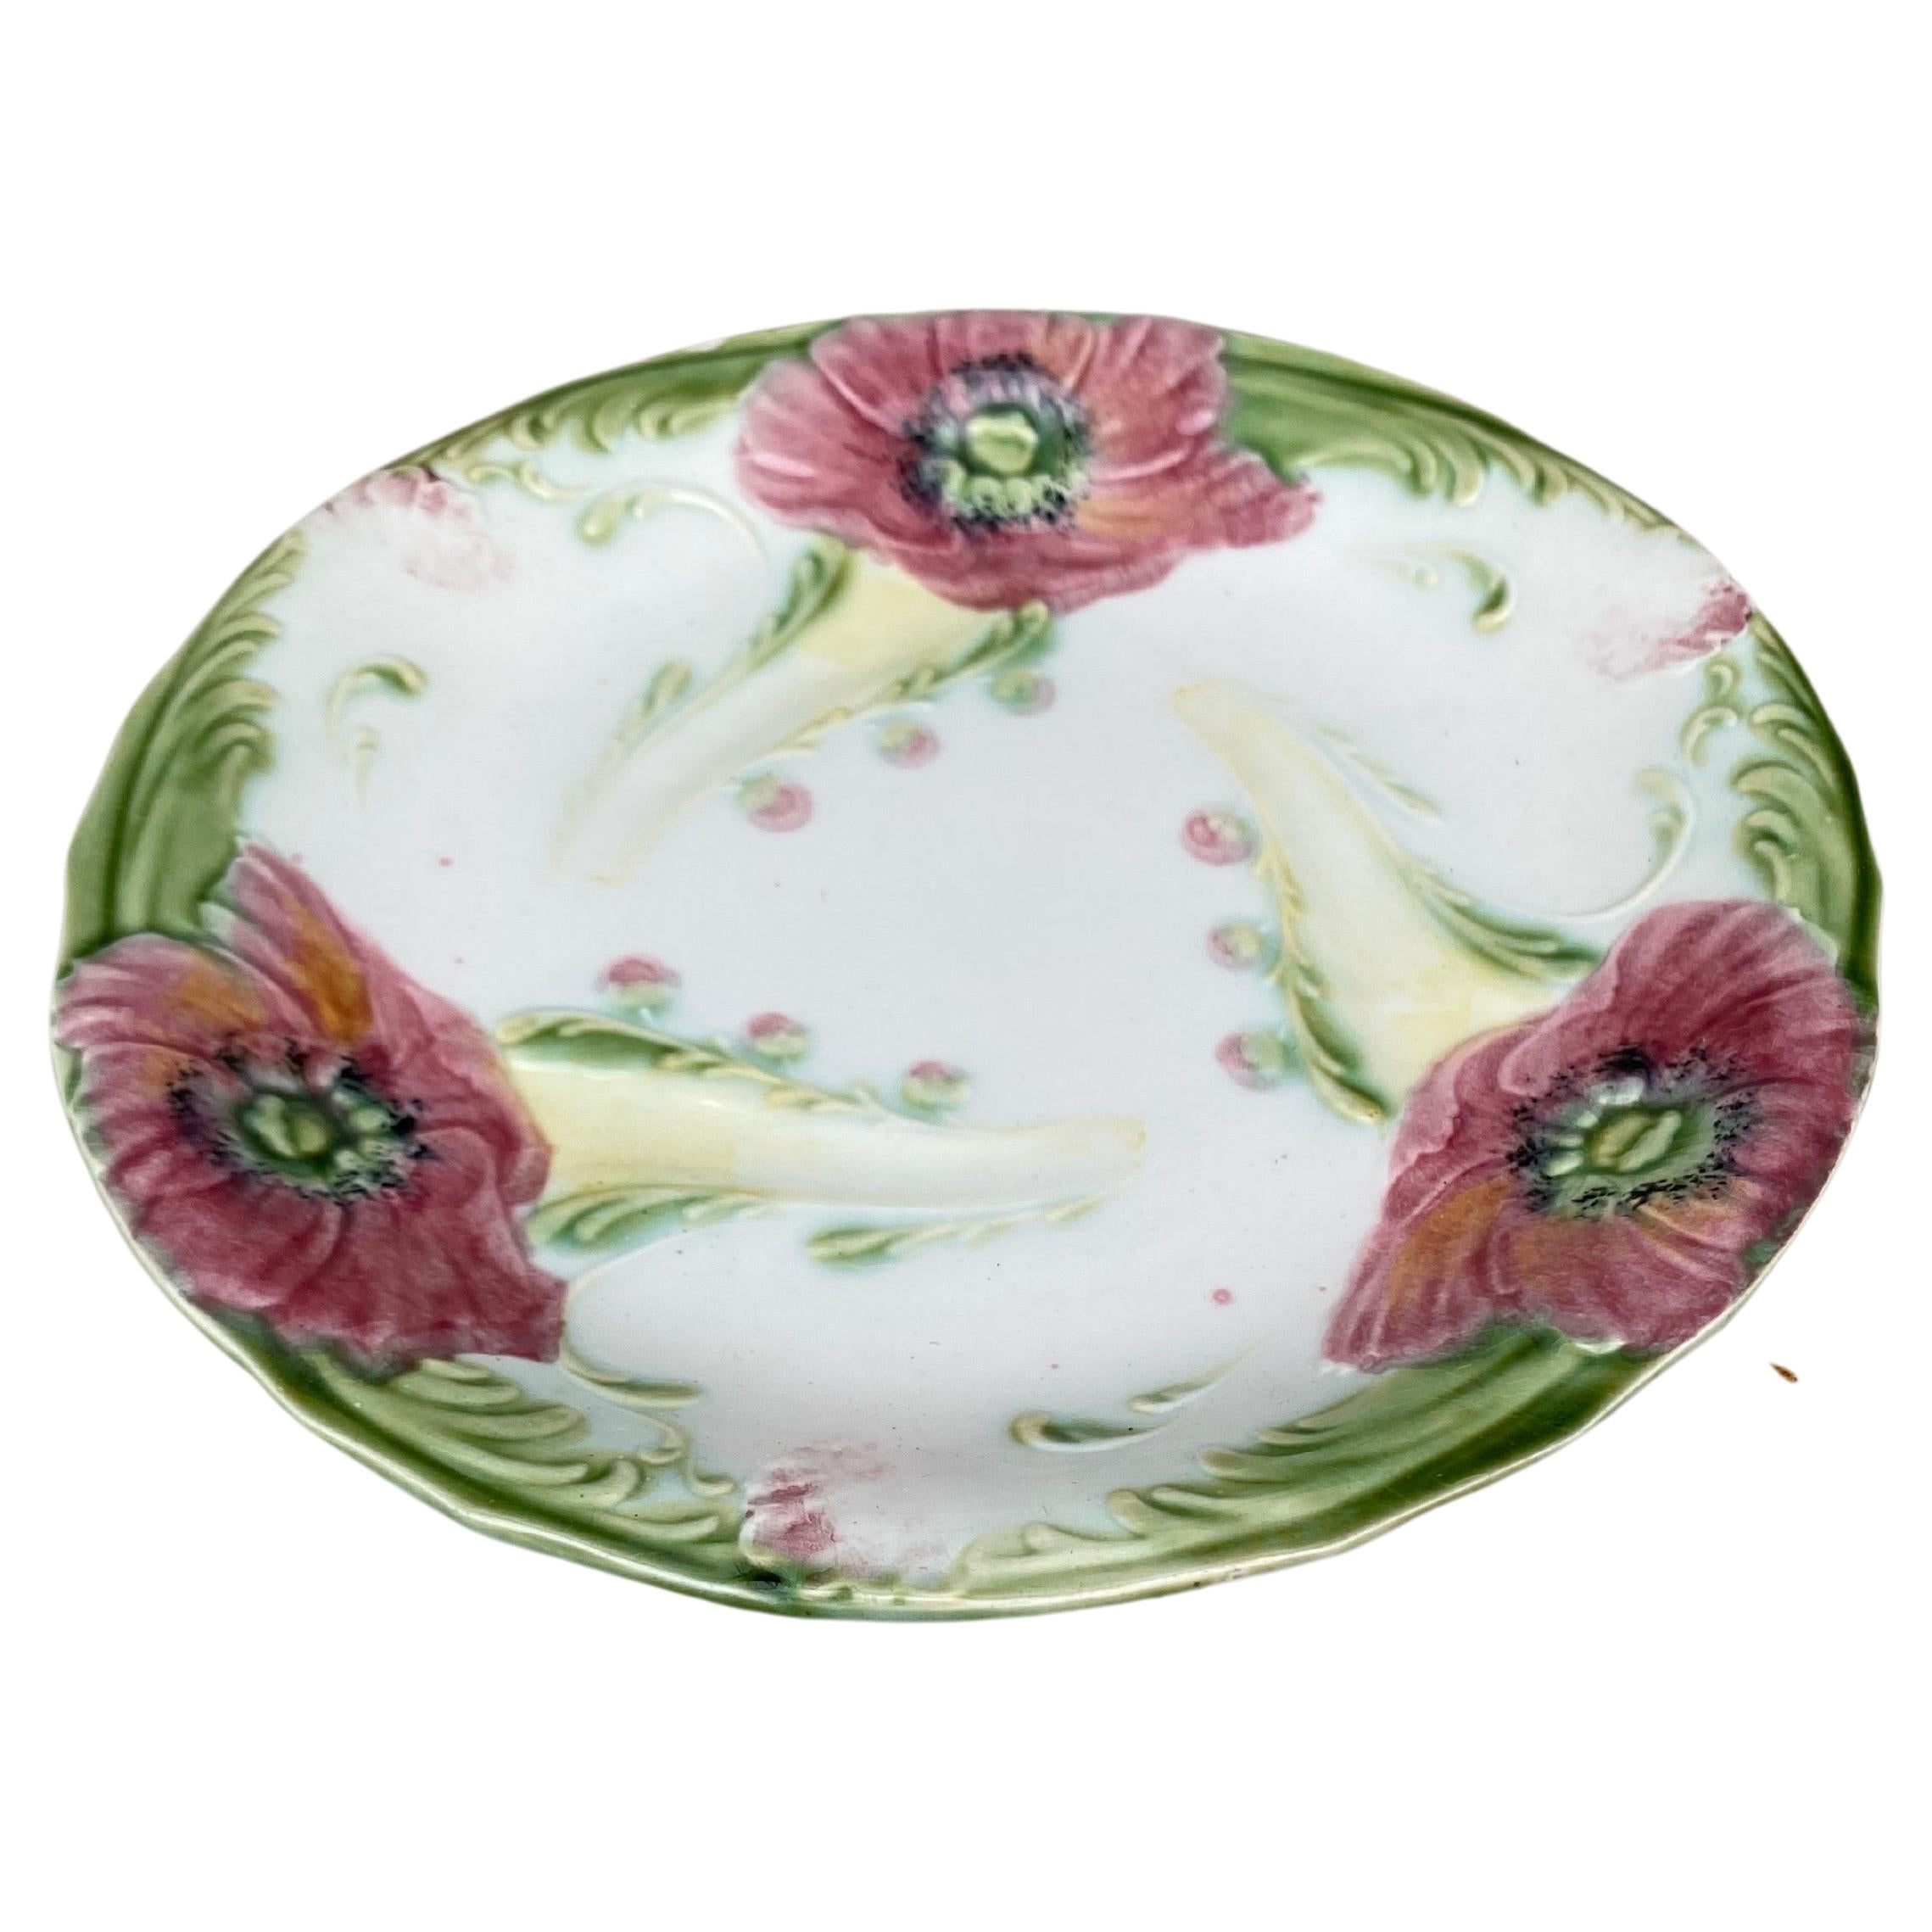 French Majolica poppies plate signed Luneville, circa 1910.